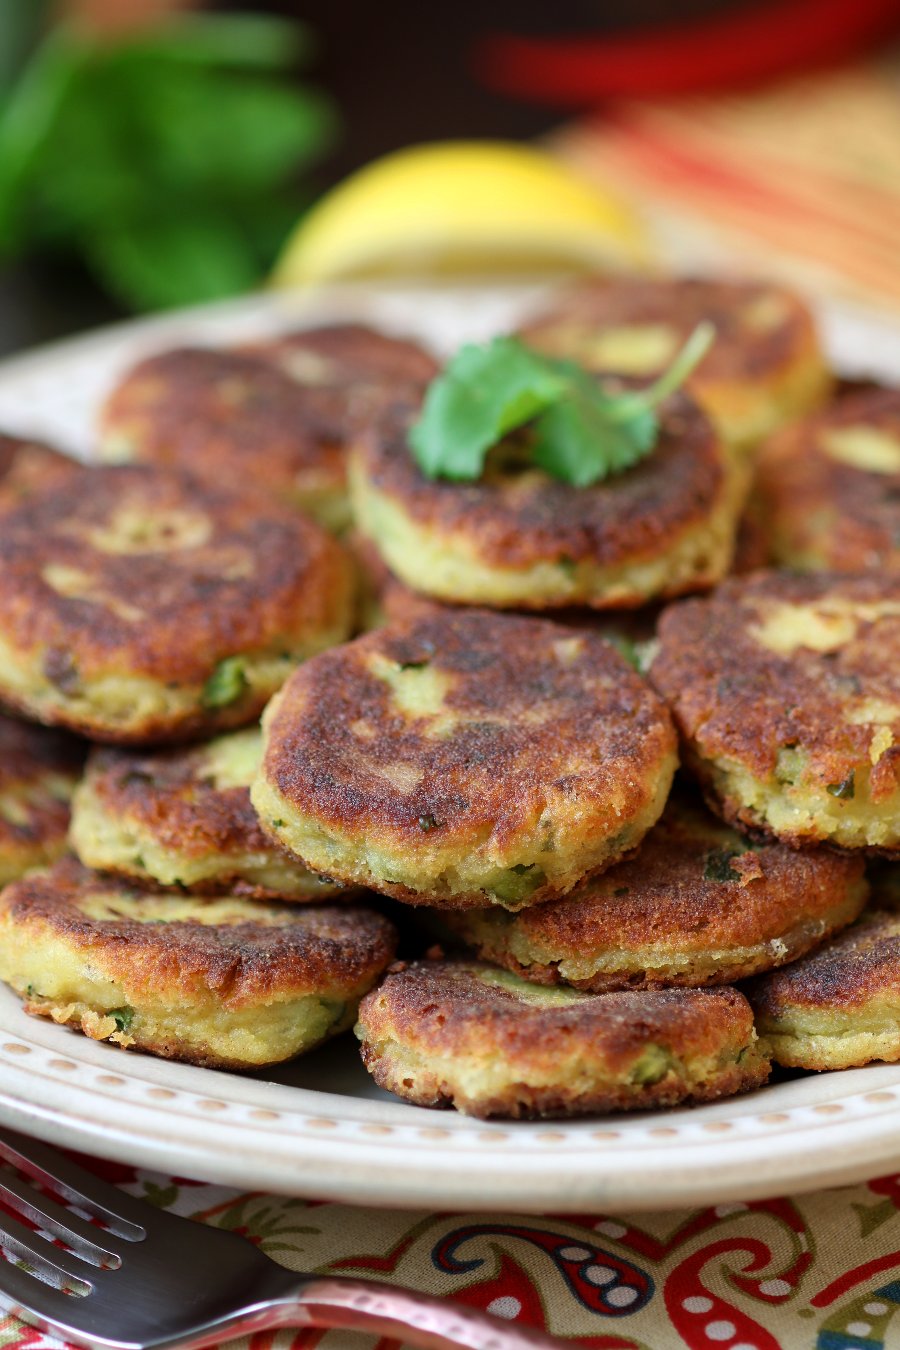 Spiced Potato Patties (Aloo Tikki) are a crisp and tender Indian street food snack that you can recreate in your kitchen.